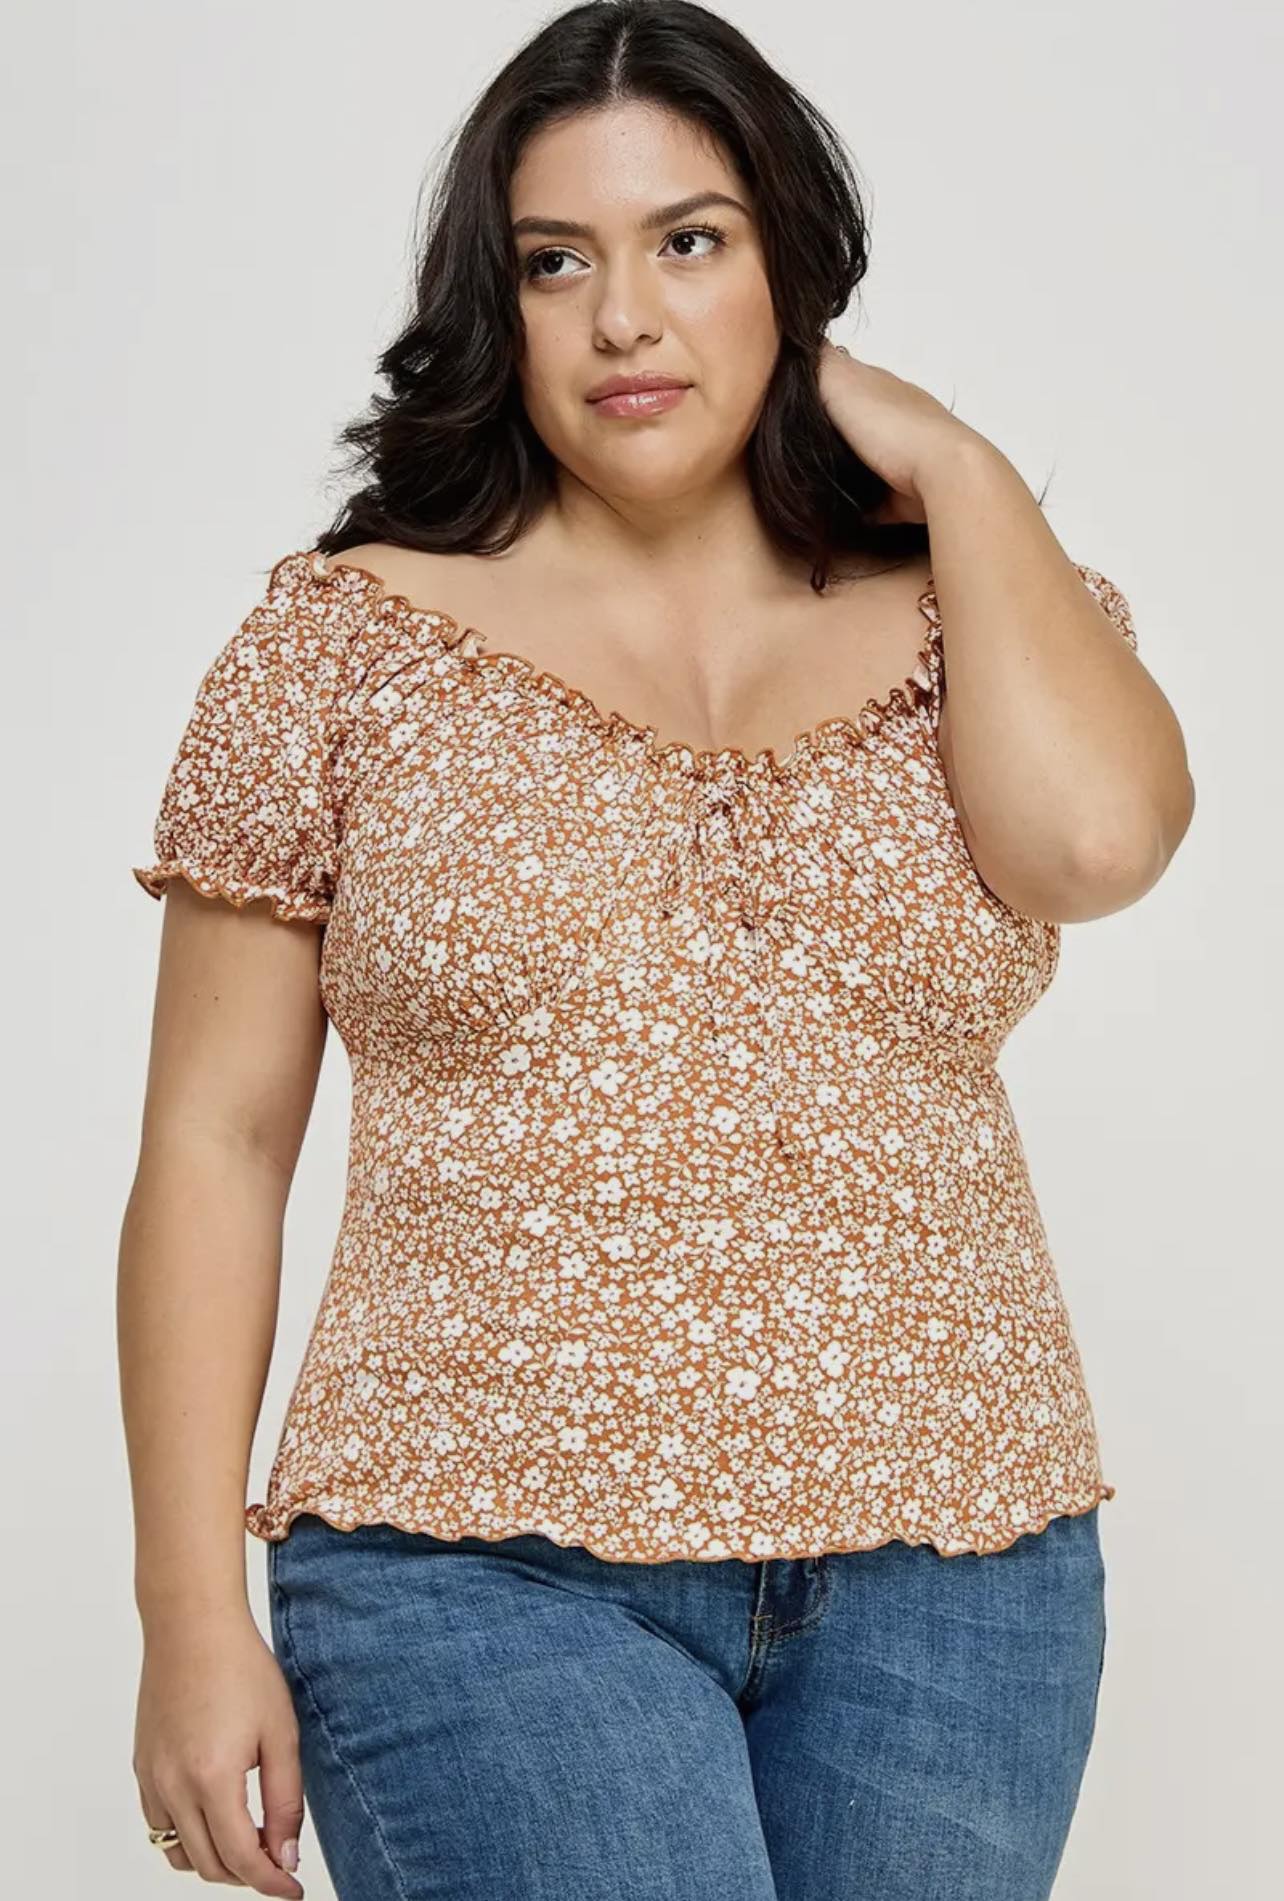 Ginger Ditzy Floral Top